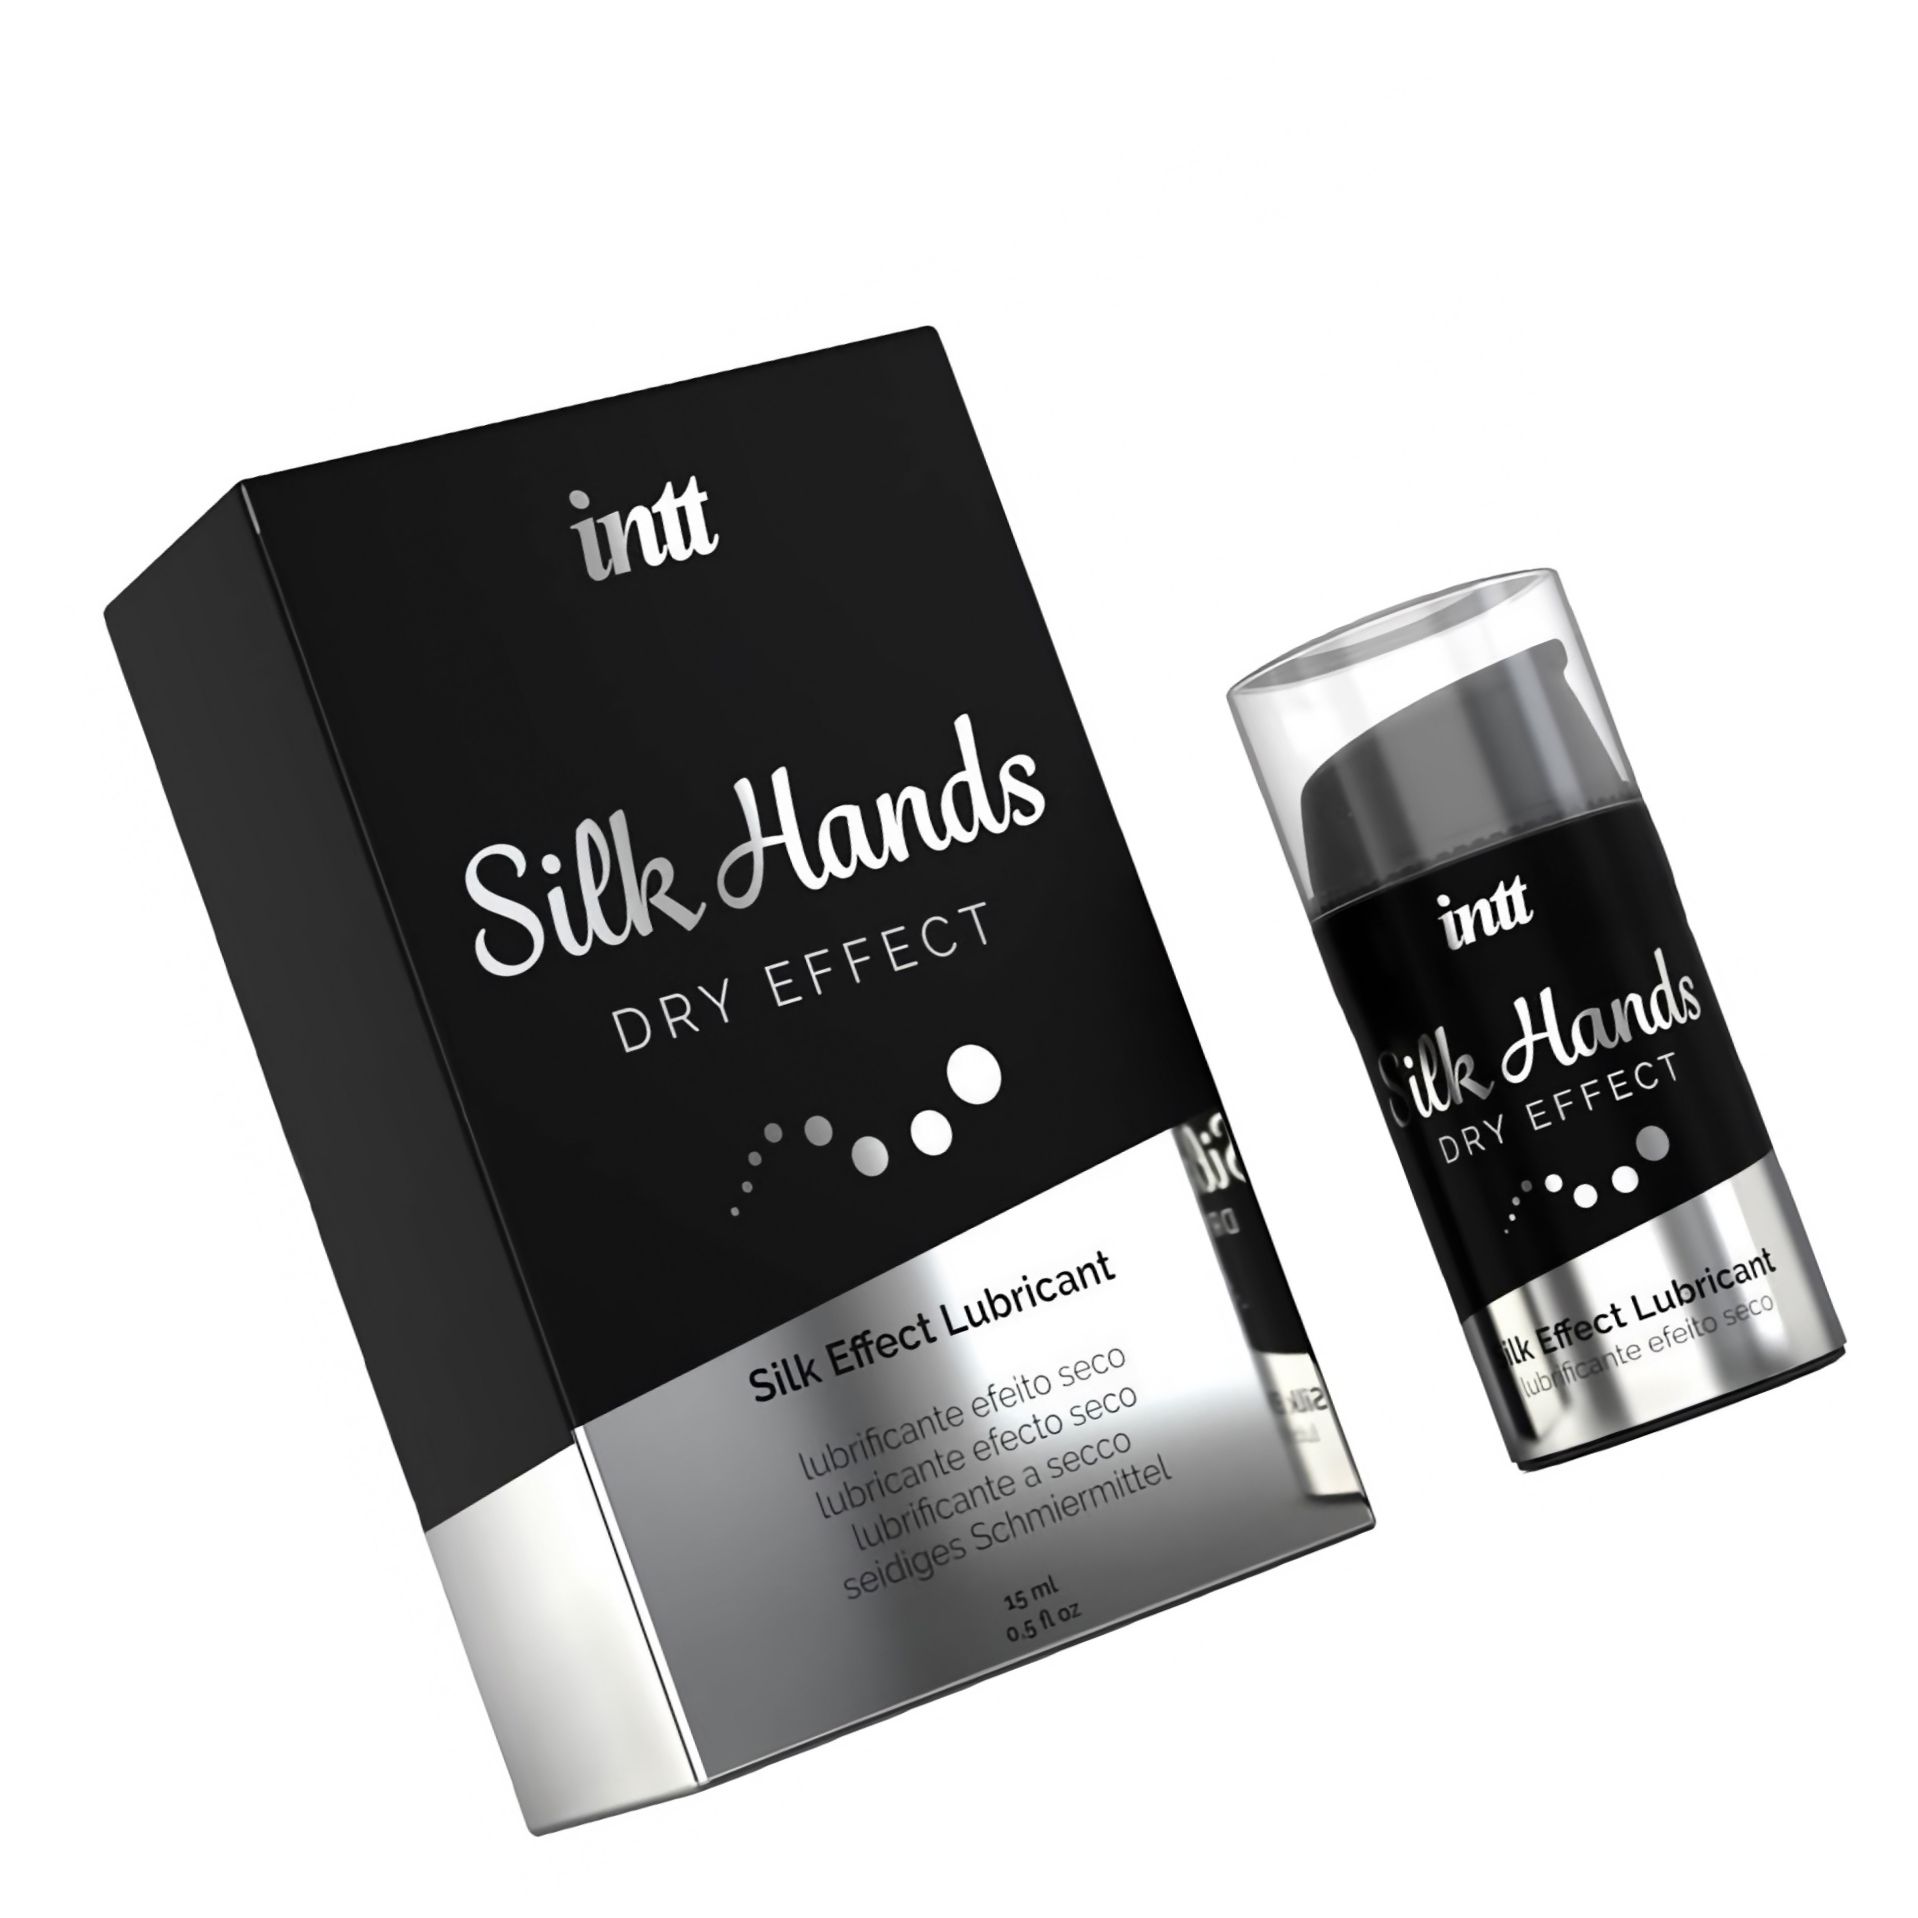 Lubrifiant Silicon Silk Hands Airless